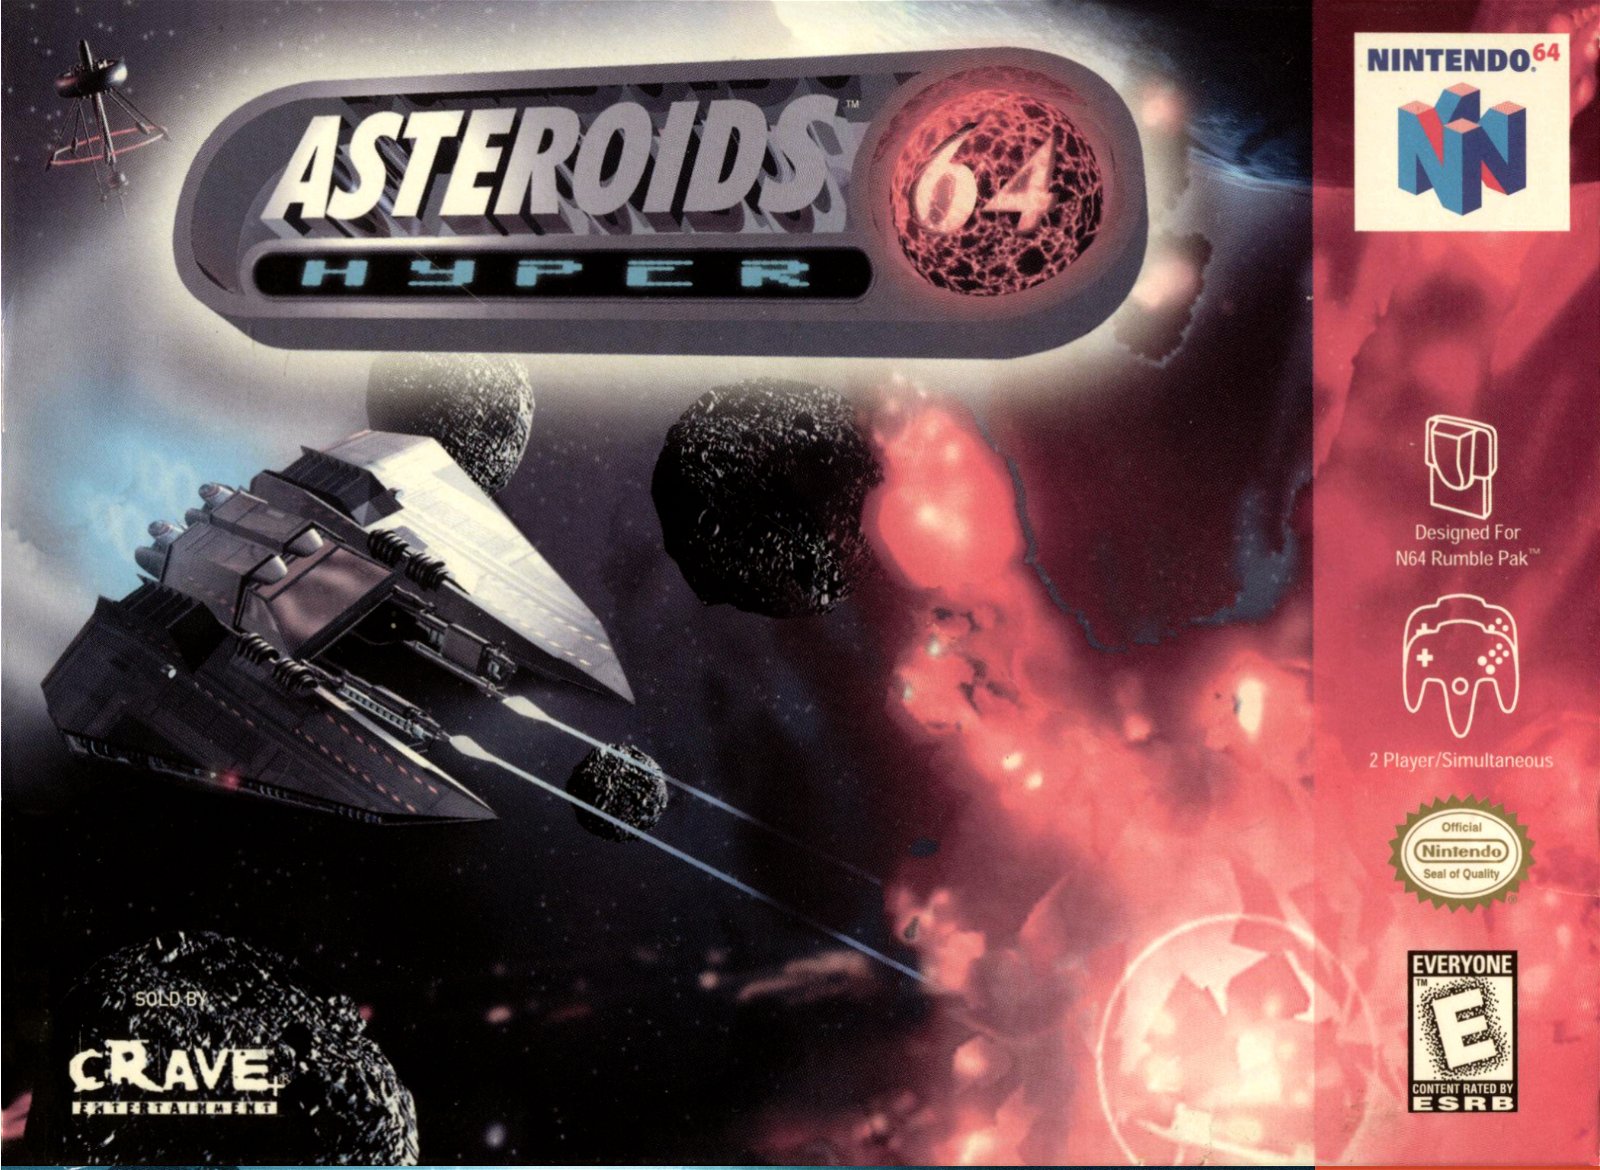 Image of Asteroids Hyper 64